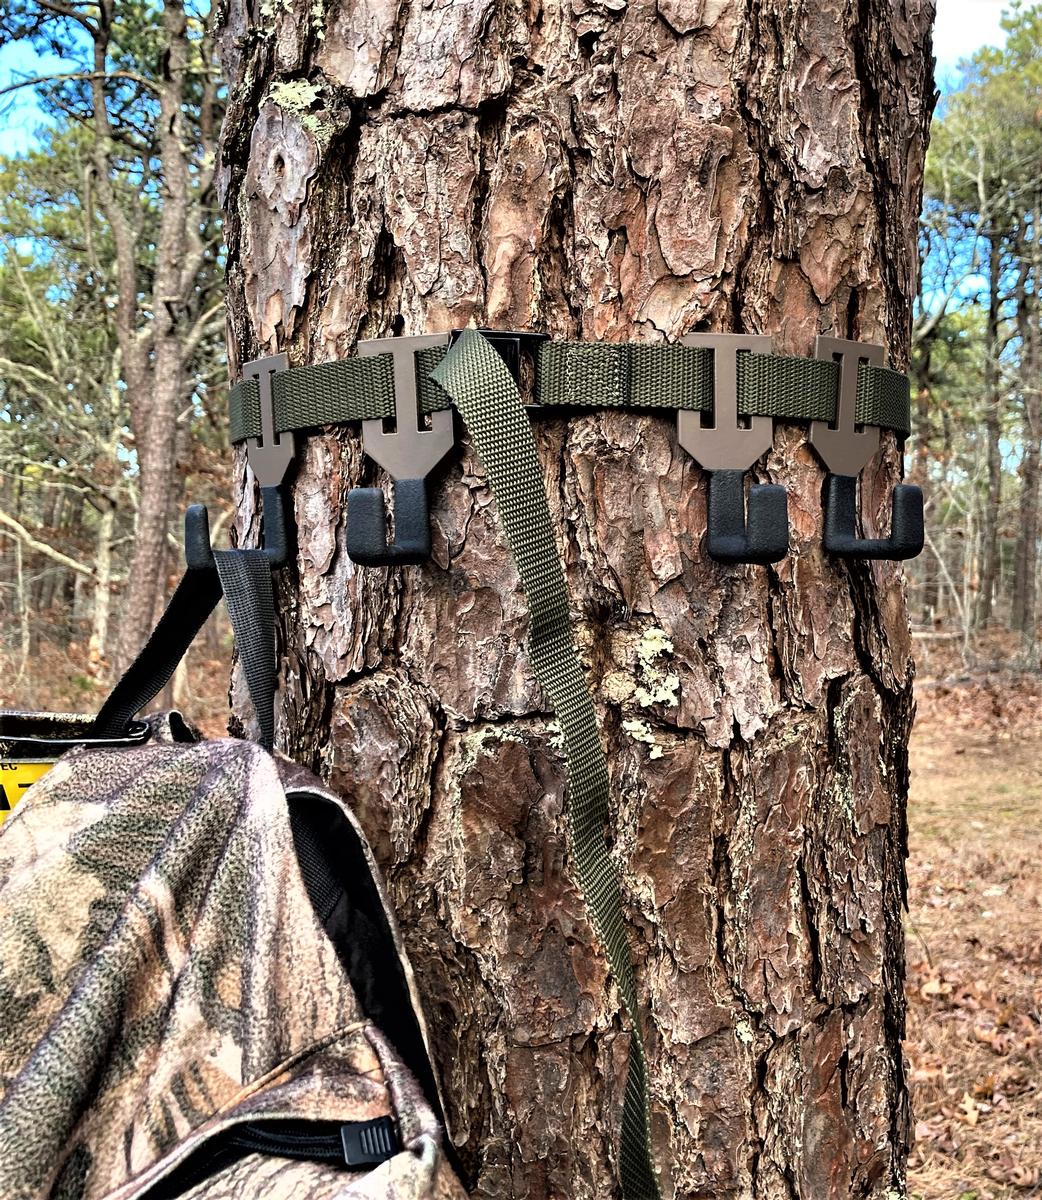 Treestand Strap Gear Hangers for Hunting Gears Bow - 5 Hooks Set – Highwild